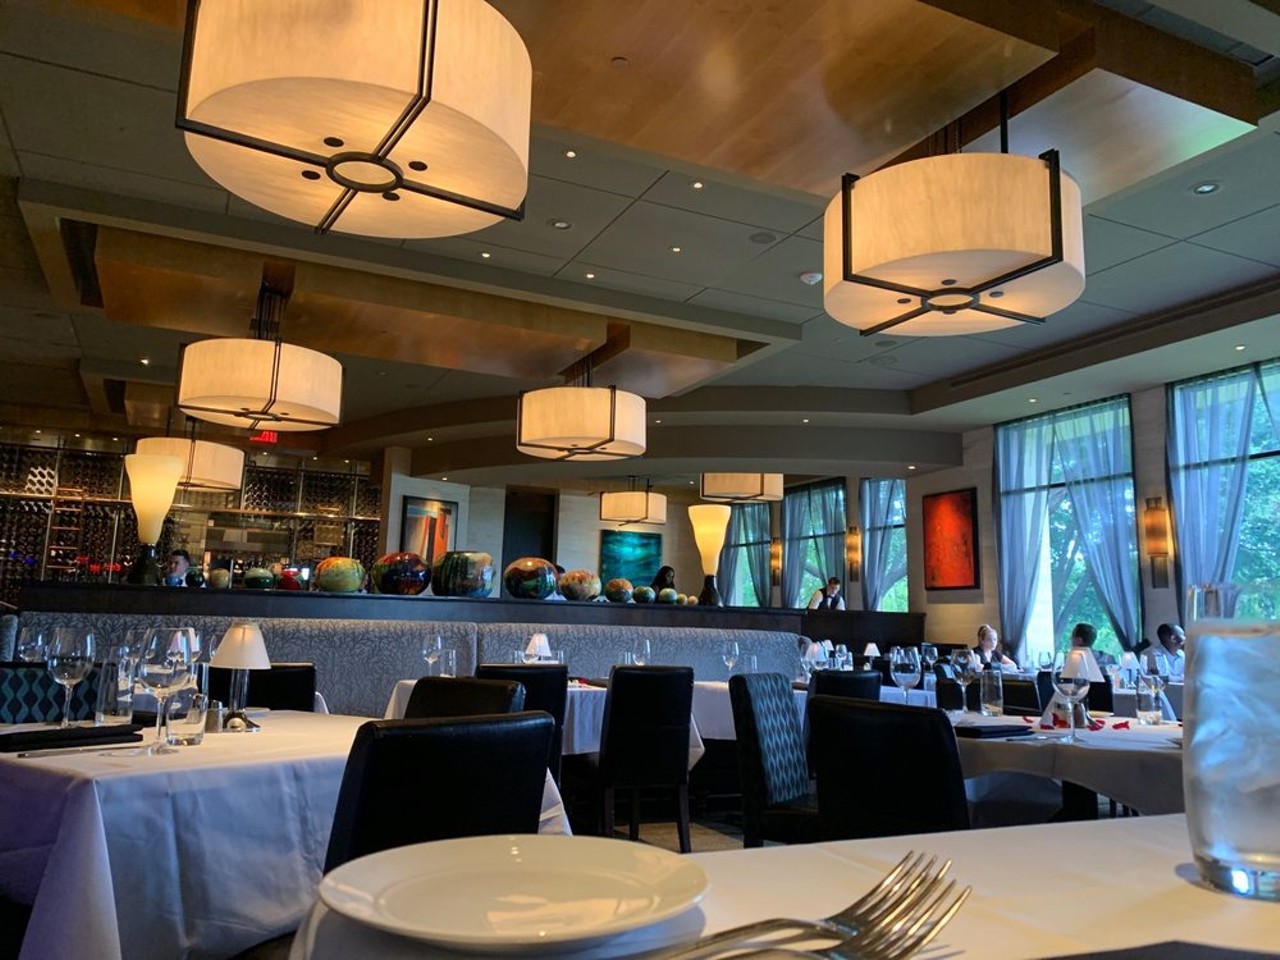 Eddie V’s Prime Seafood
4.5 out of 5 stars, 1026 reviews
7488 W. Sand Lake Road
”We went to Eddie V's for my man's birthday. This place was beautiful inside. It's is very upscale so you want to come dressed up and ready to spend for some damn good food!” - Marcella M.